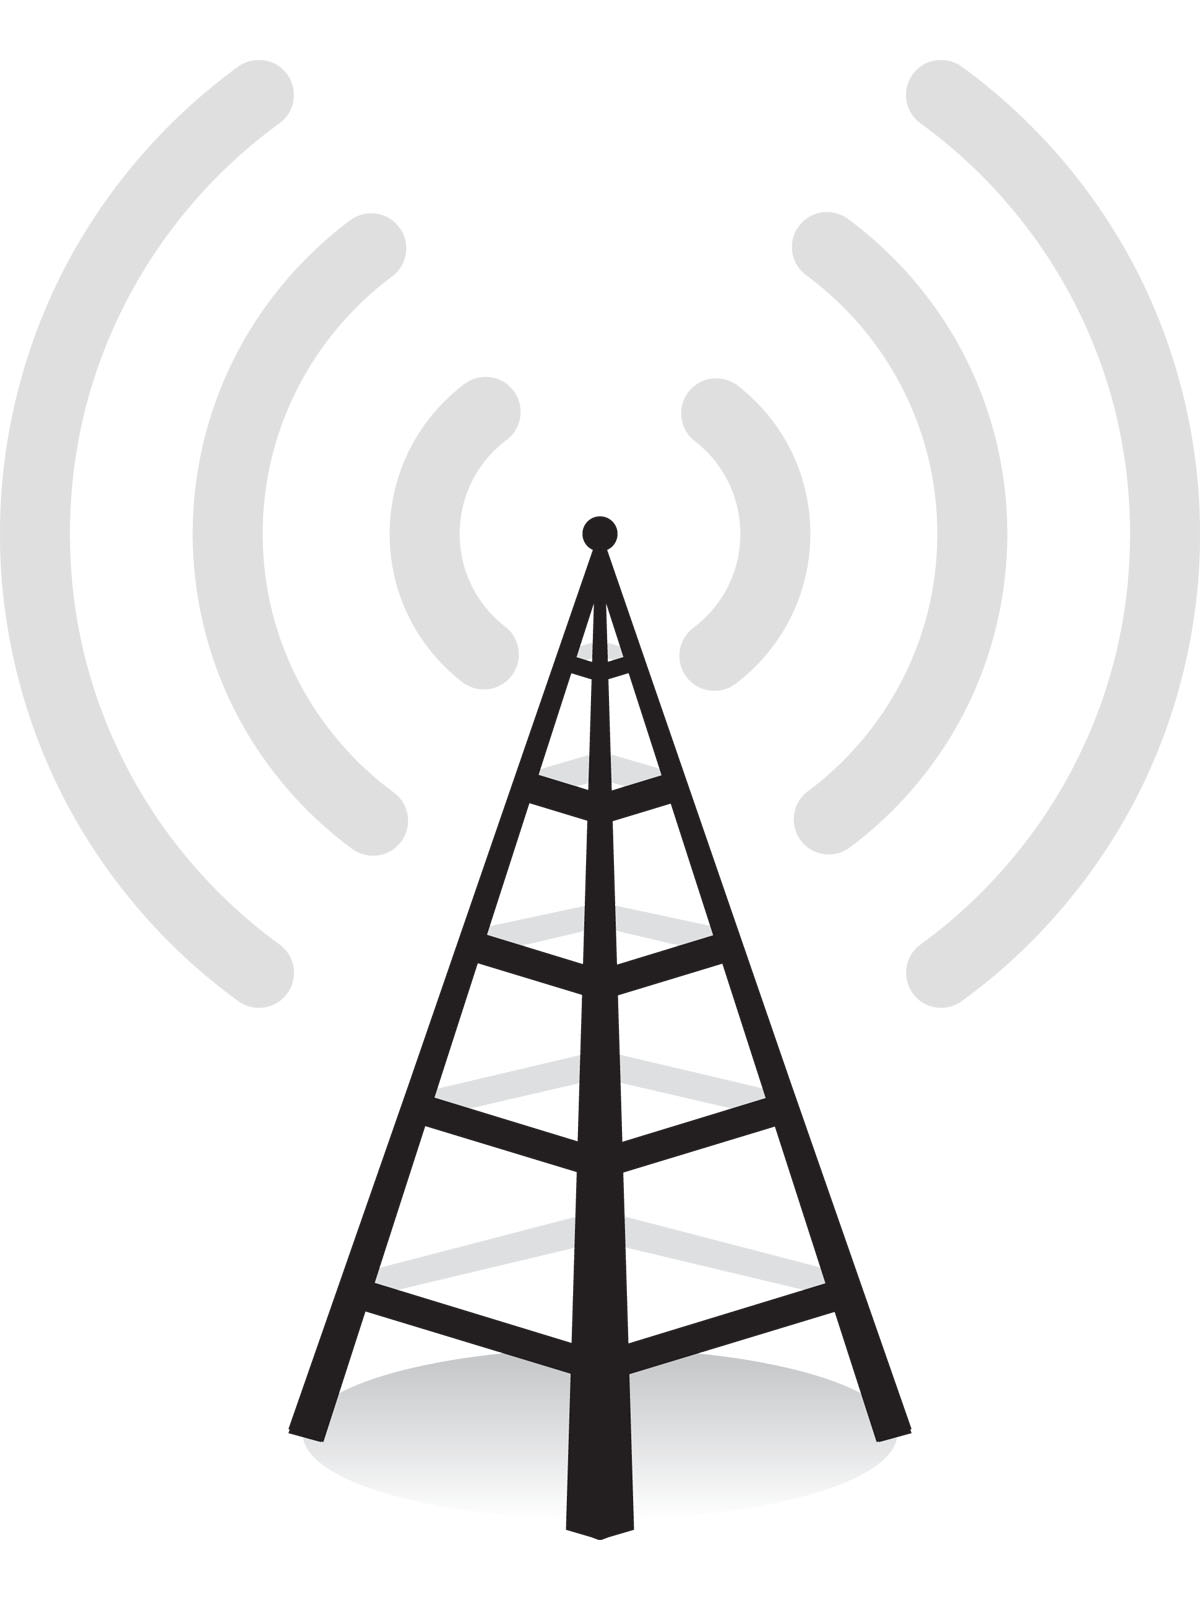 Radio Tower Logo Images & Pictures - Becuo